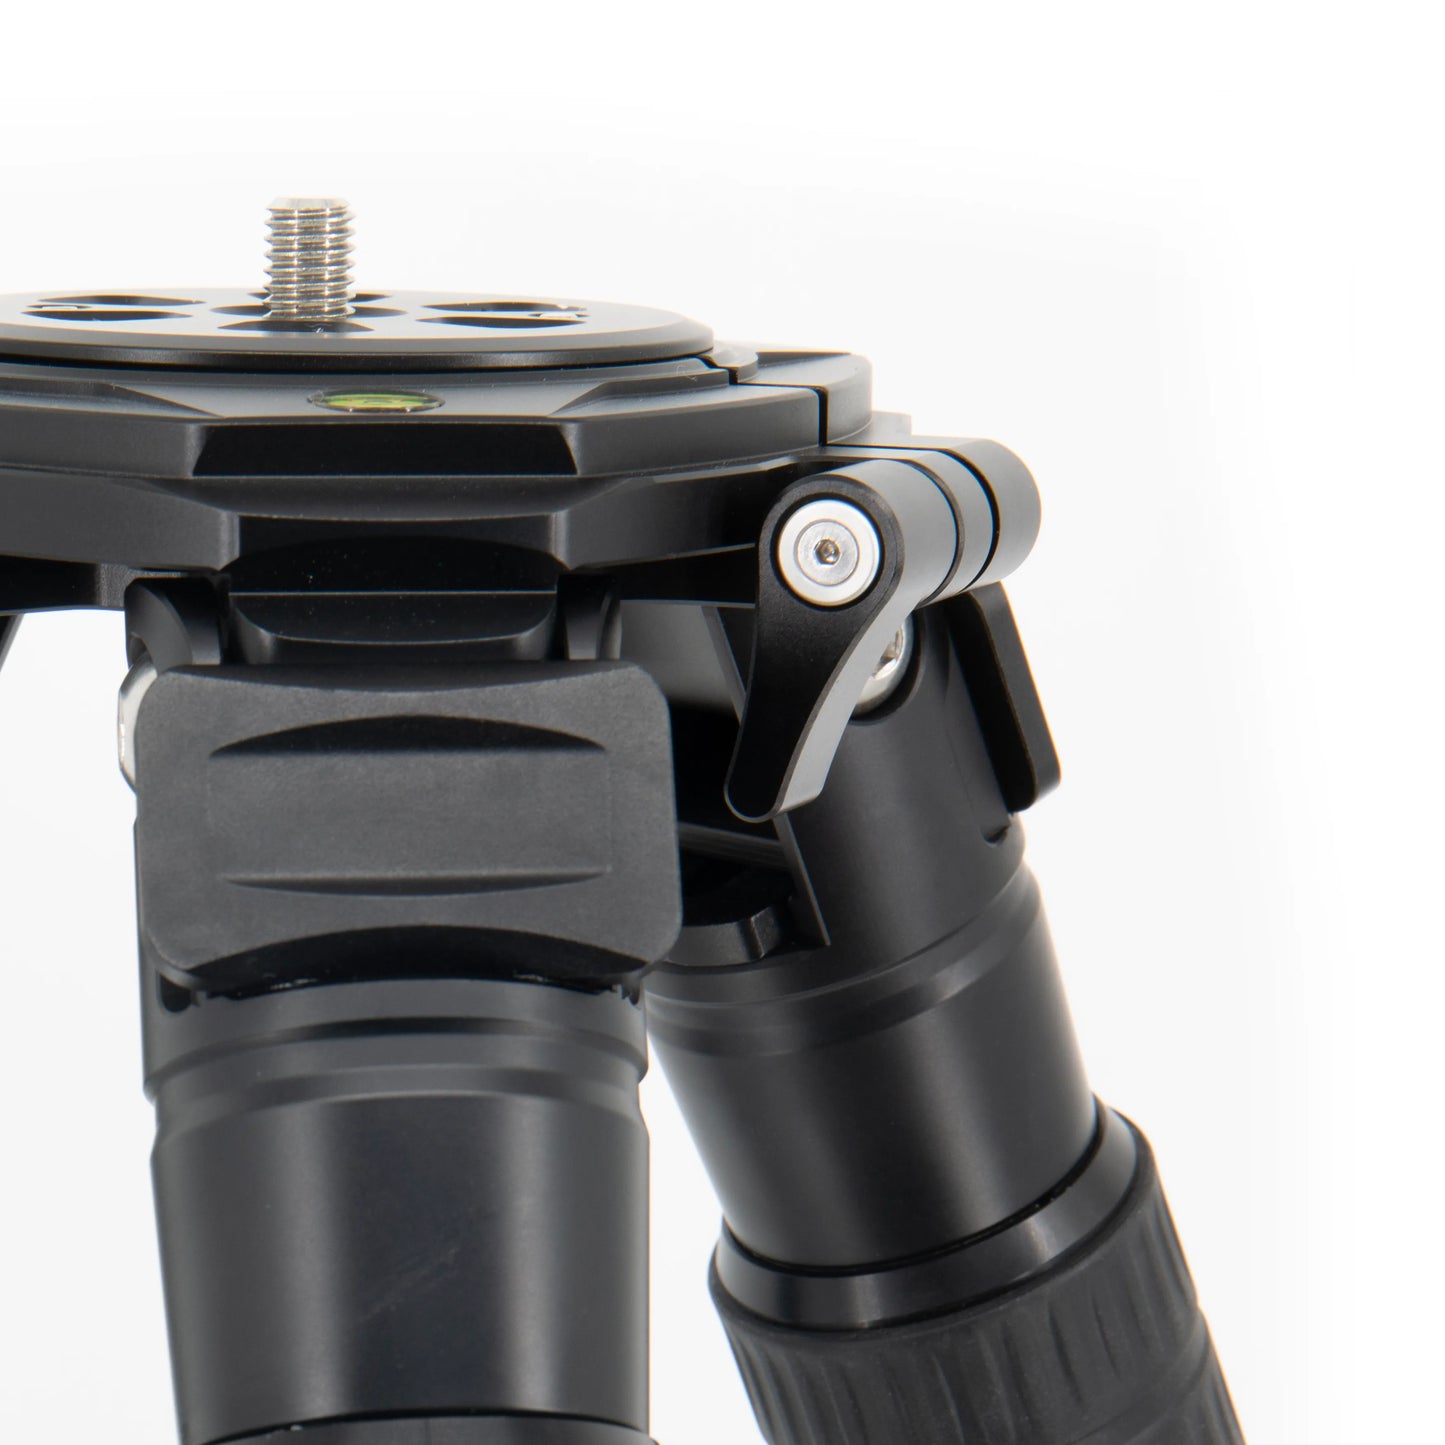 Warrior Tripods The Commander carbon fiber two section tripod